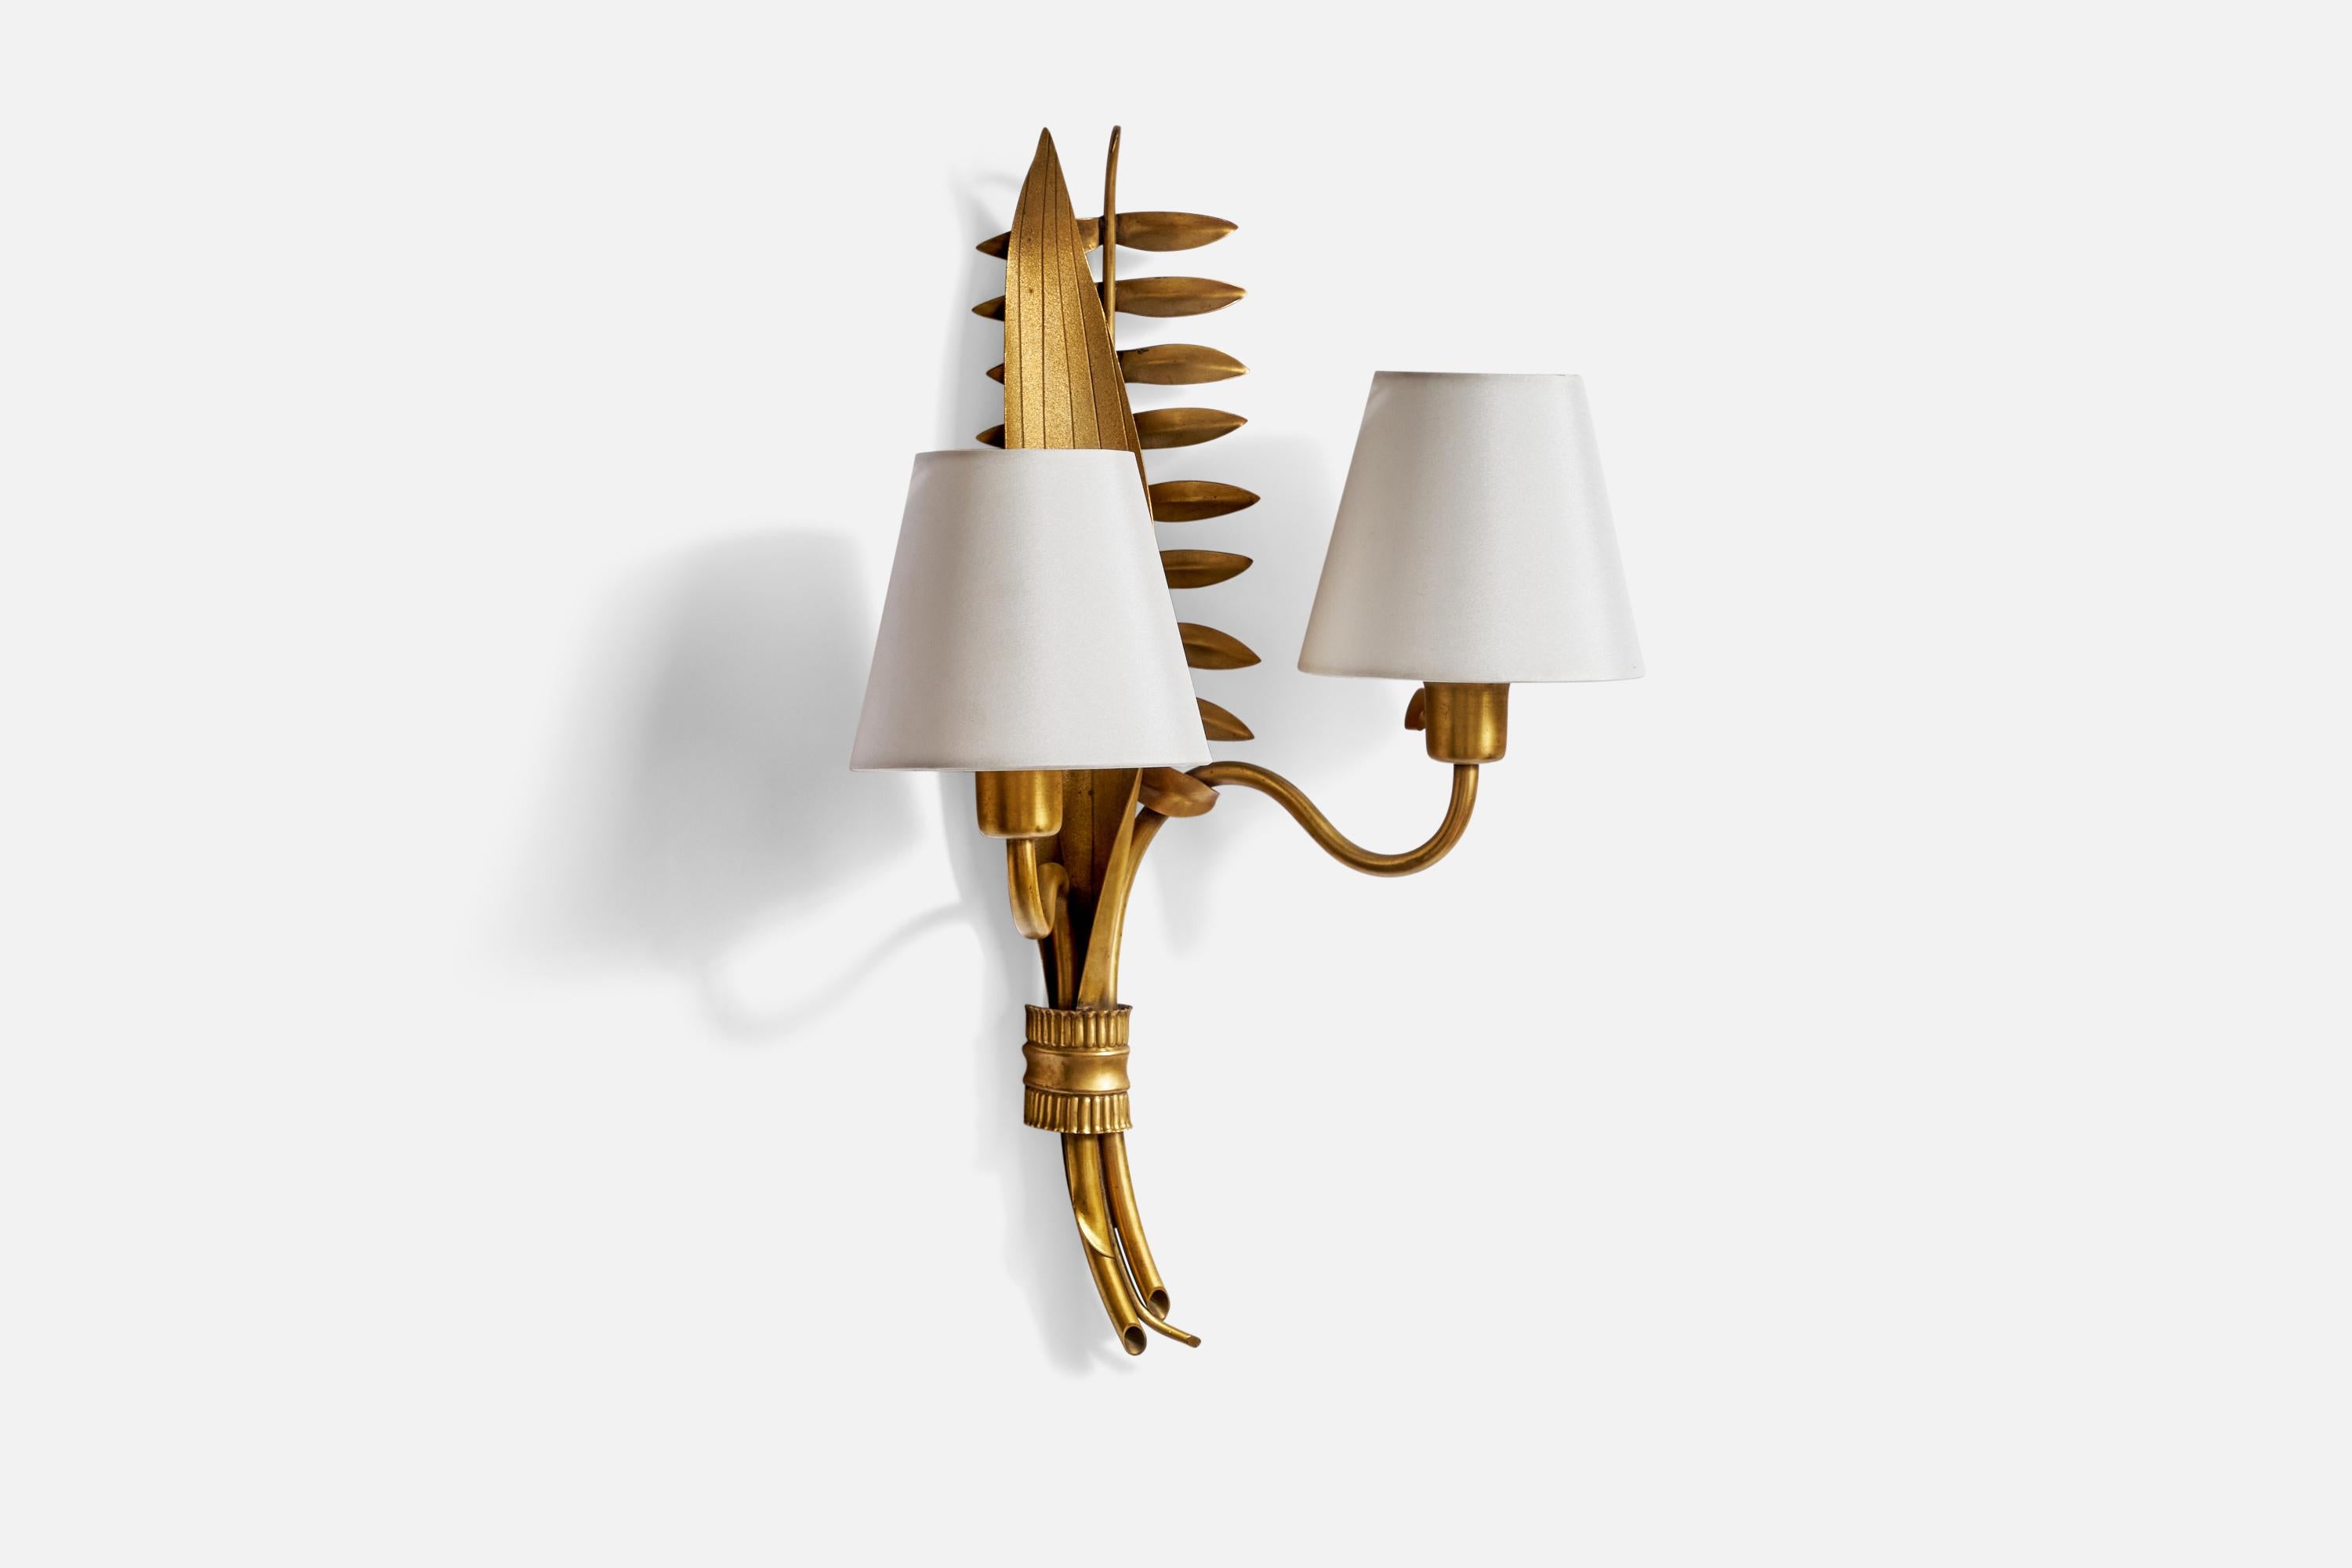 A gold-painted brass wall light designed and produced in Sweden, 1940s.

Overall Dimensions (inches): 18” H x 12” W x 7”  D
Back Plate Dimensions (inches): N/A
Bulb Specifications: E-14 Bulb
Number of Sockets: 2
All lighting will be converted for US